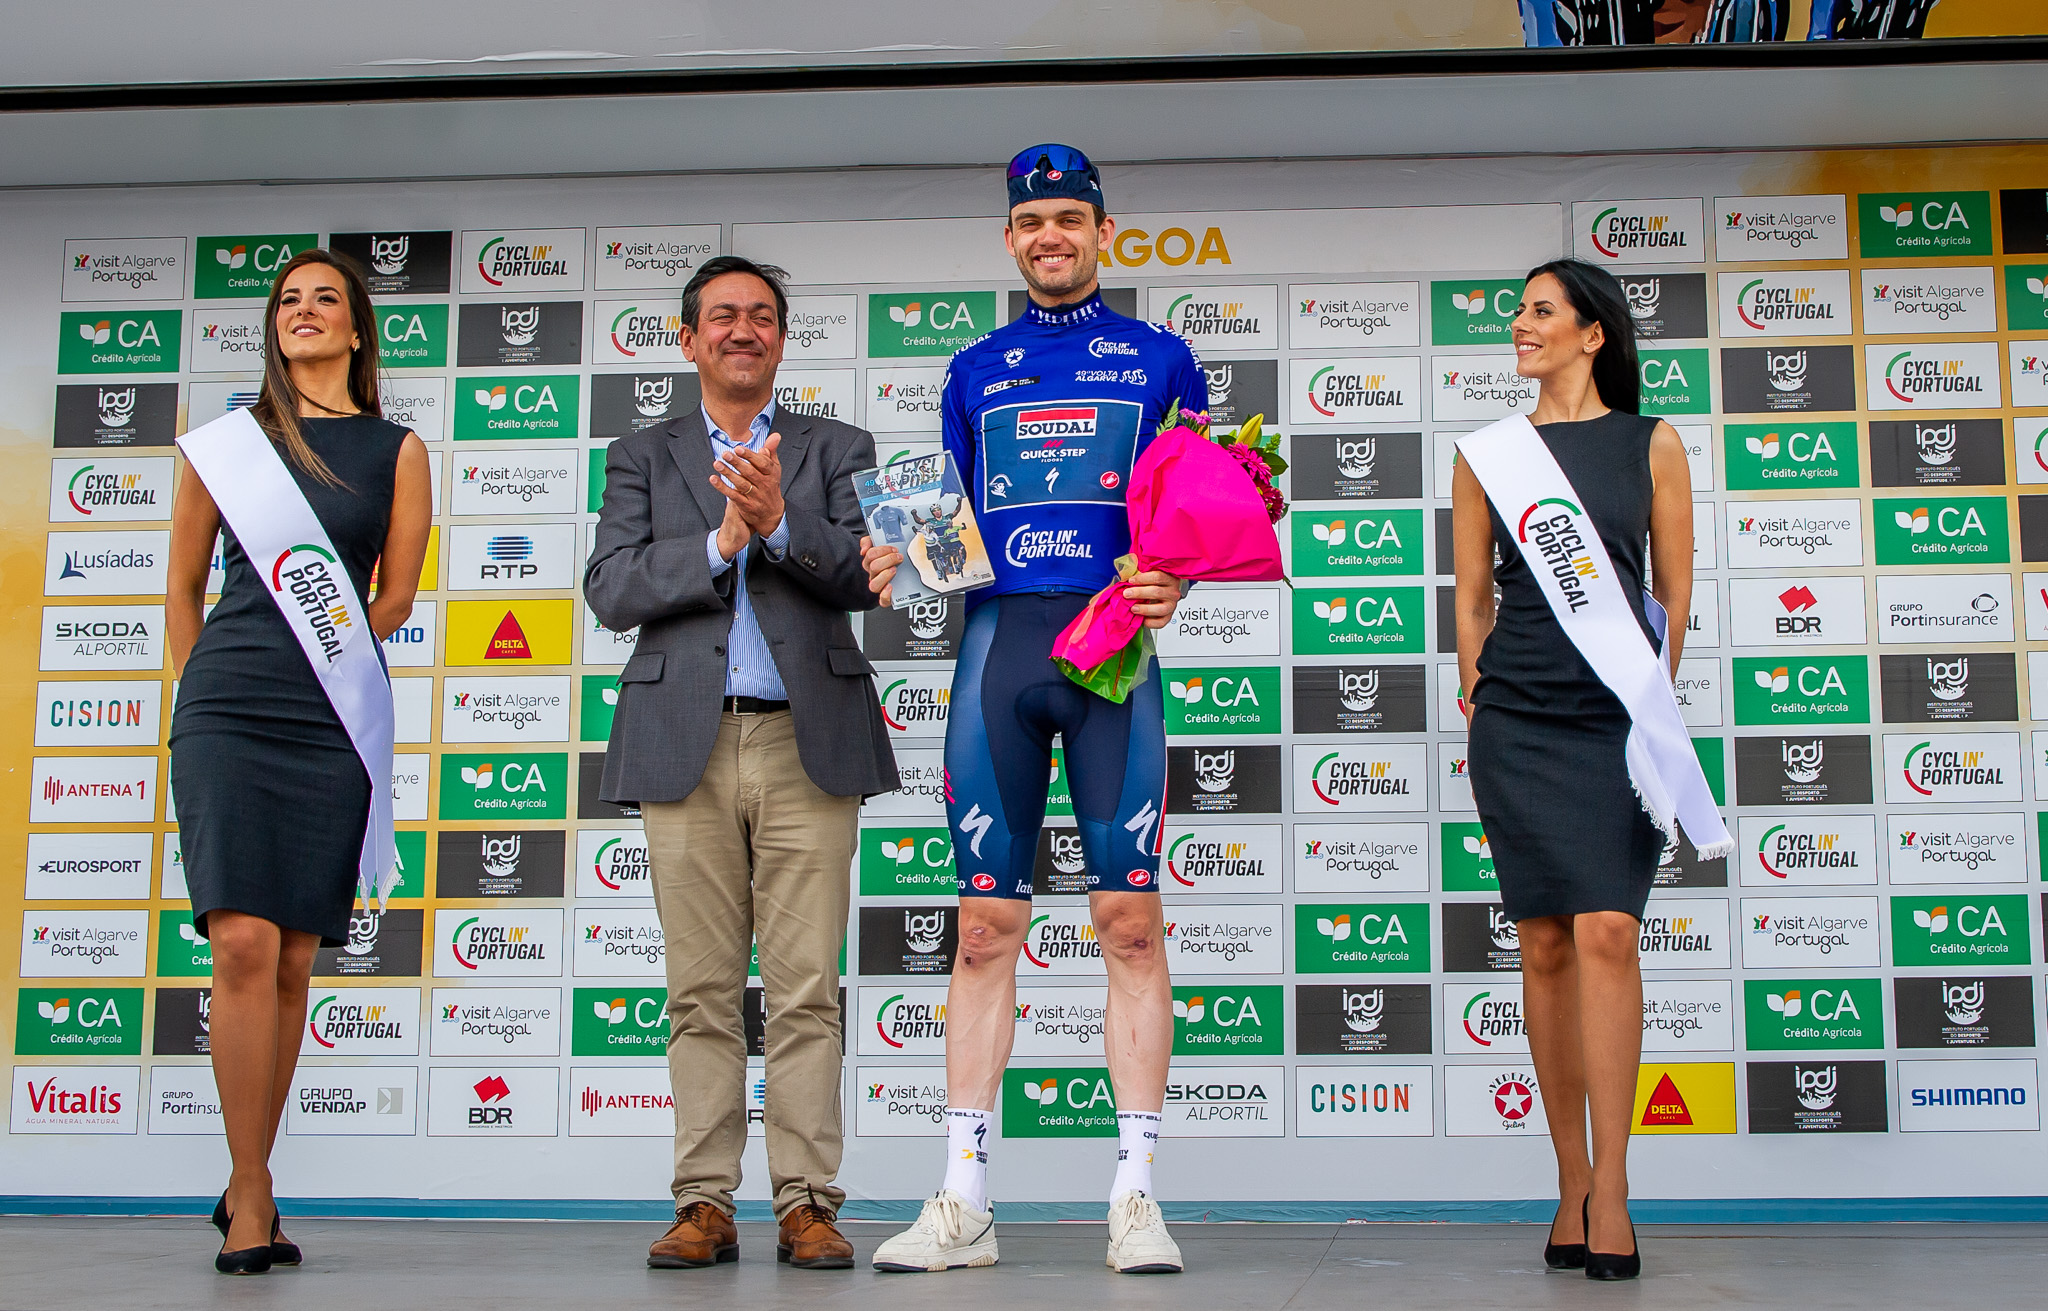 Kasper Asgreen at the podium of the 49th Volta ao Algarve as the winner of the mountain classification. 